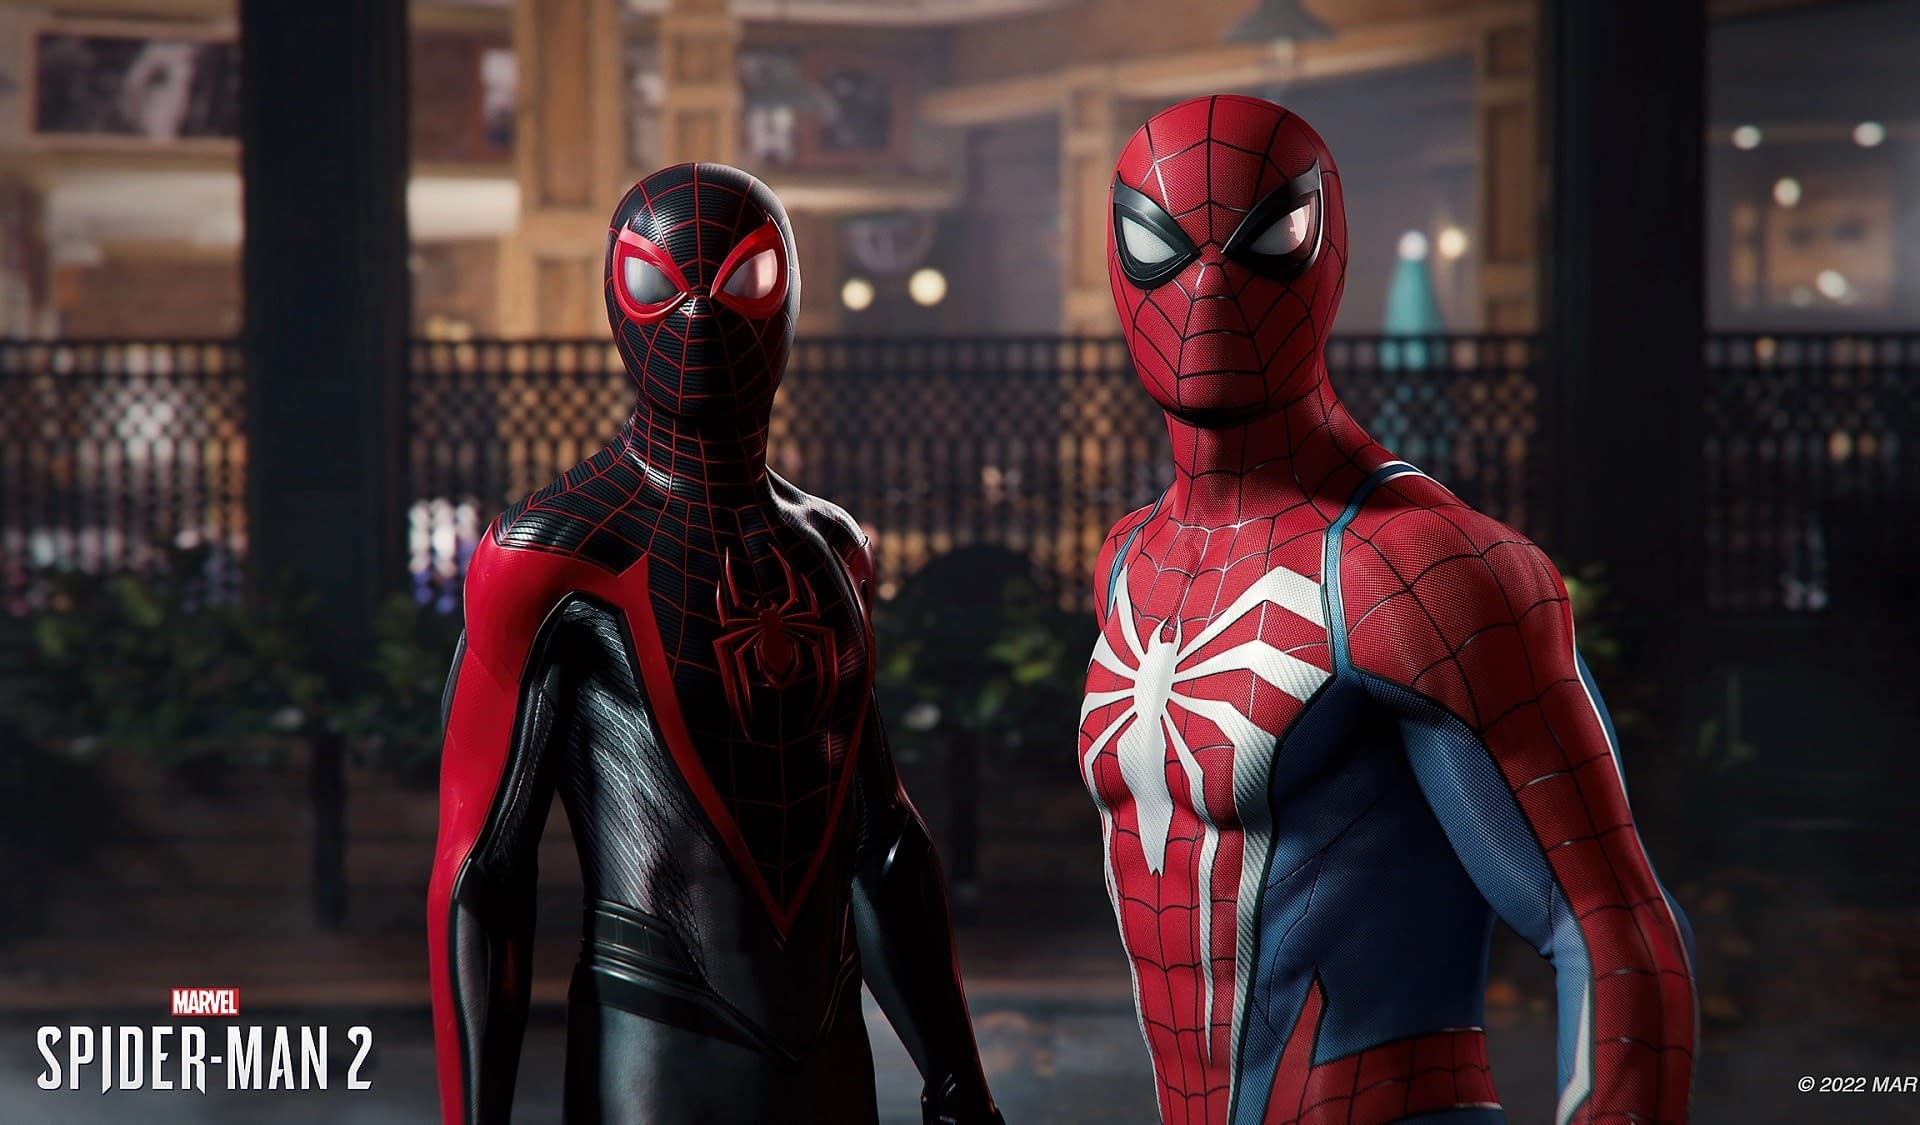 Insomniac Games Announces The Main Character of Next Spider Man Game!